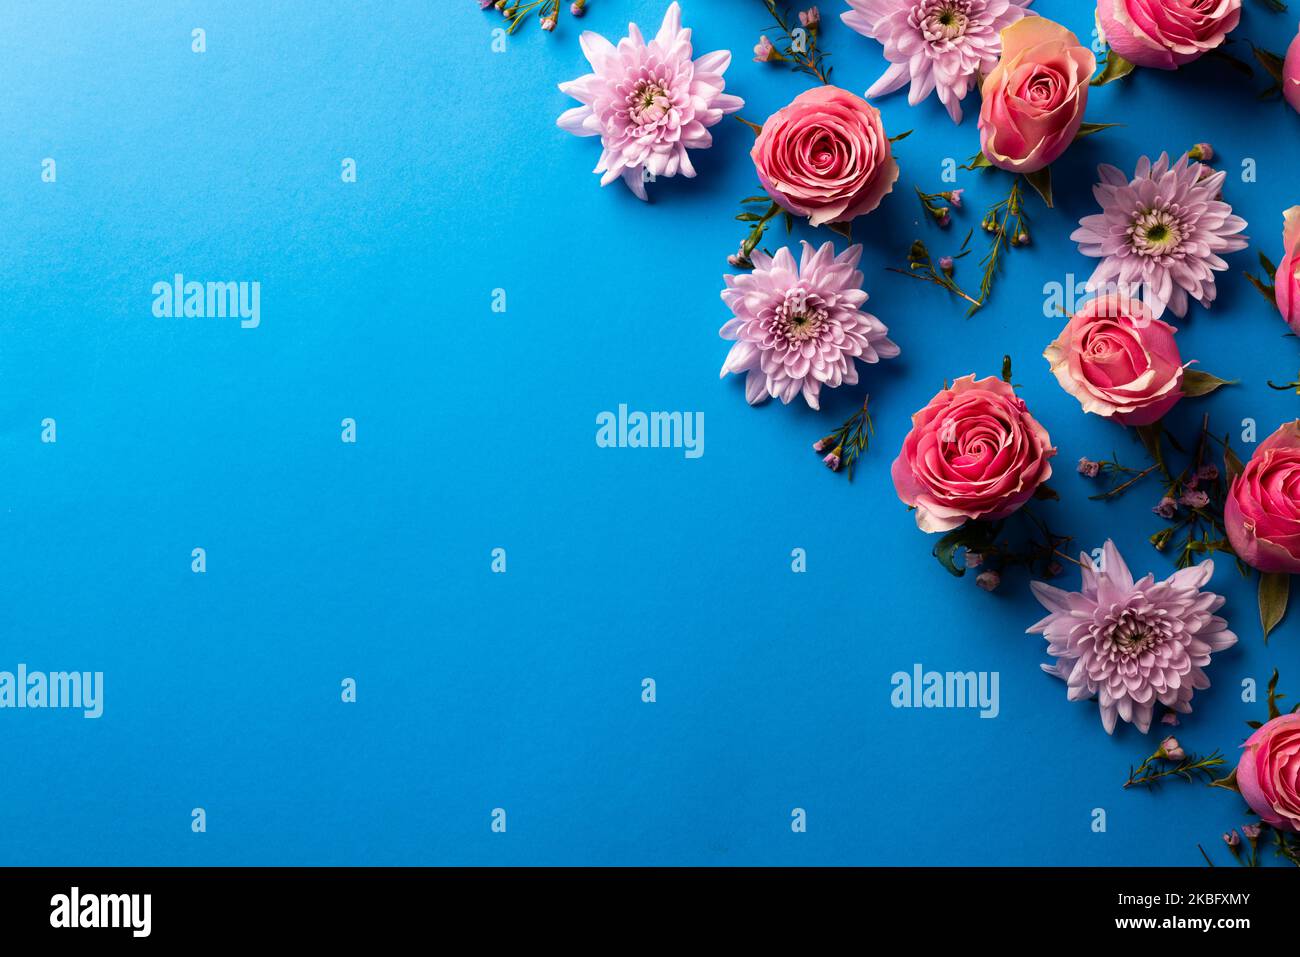 Composition of roses on blue background Stock Photo